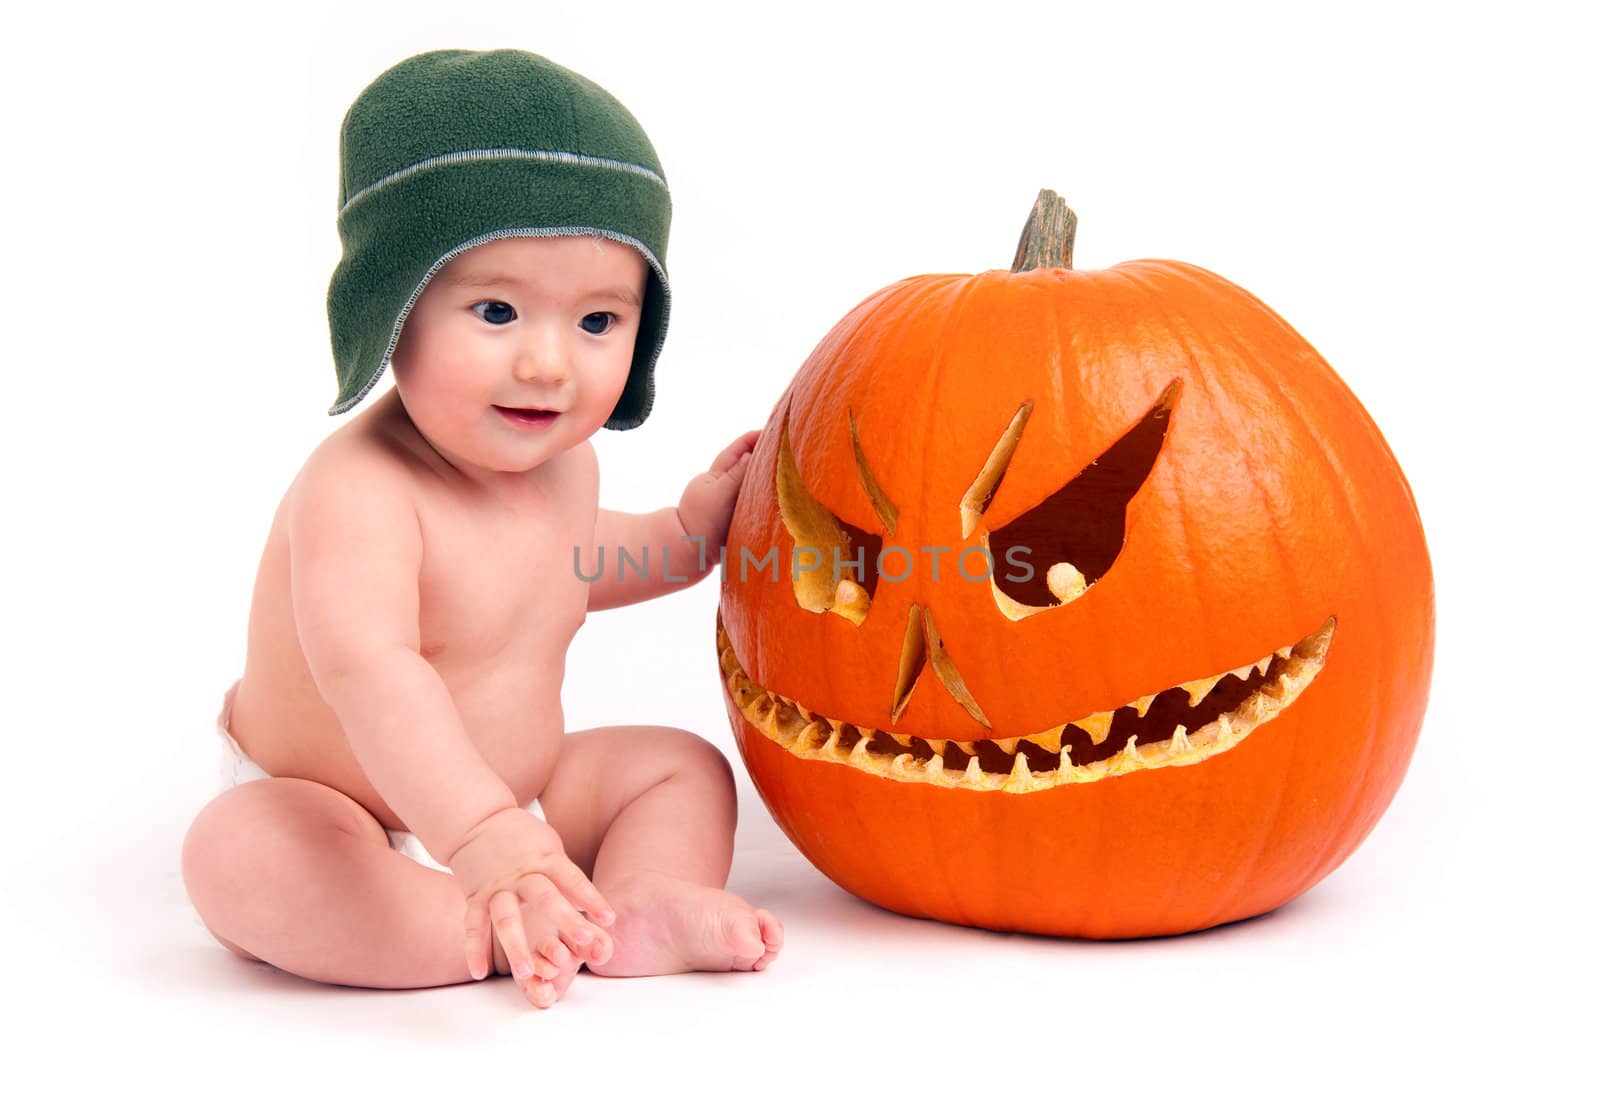 Boy with Pumpkin by ChrisBoswell